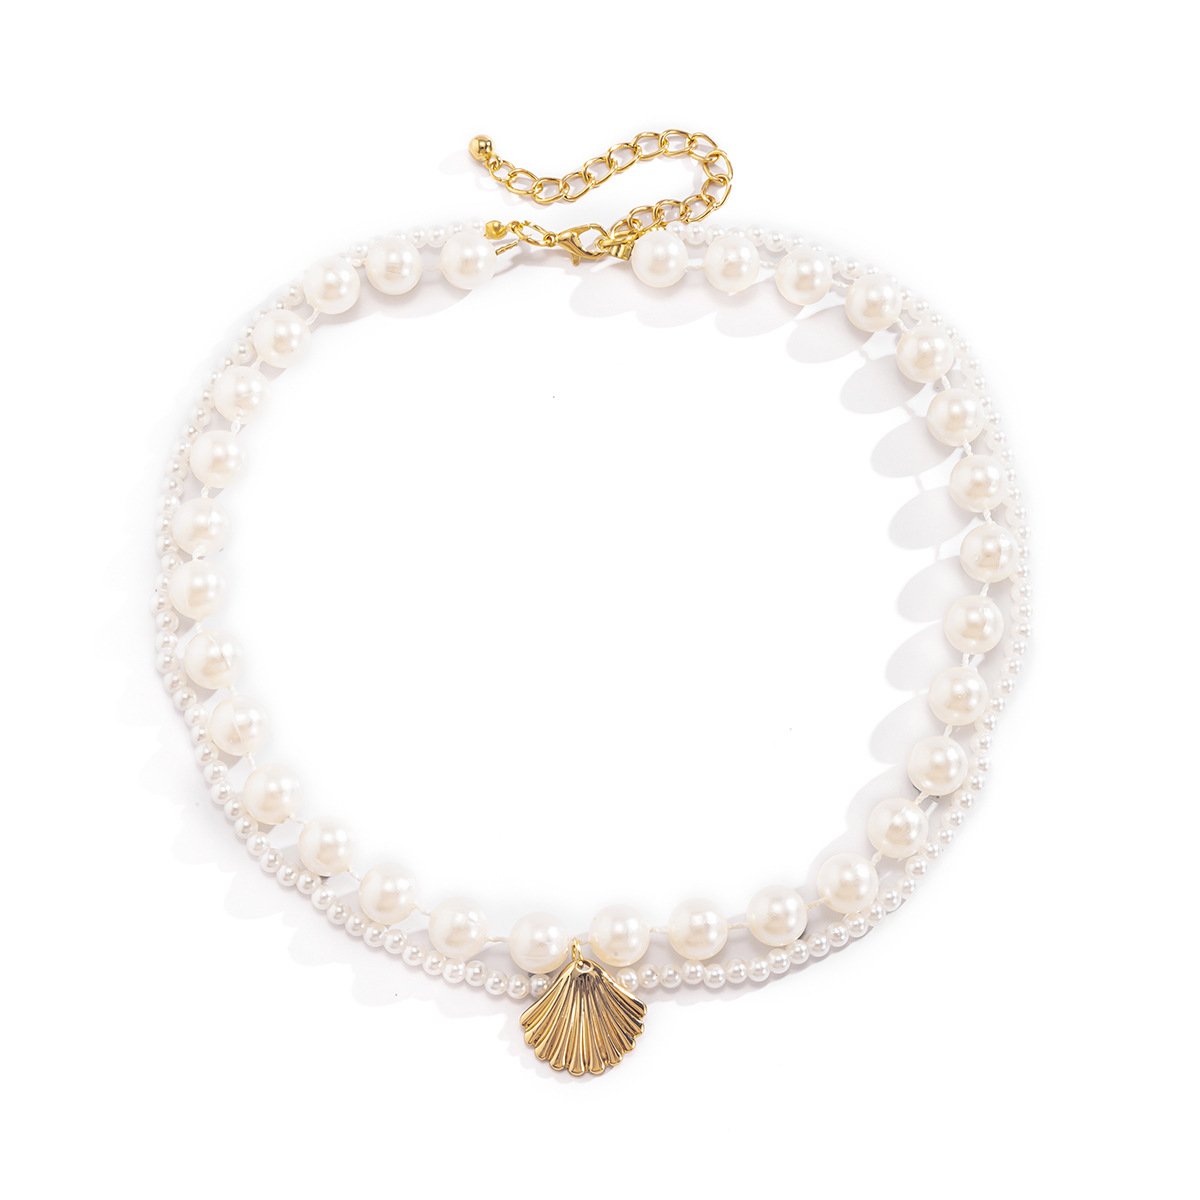 Elegant Artificial Pearl Necklaces for Women-Necklaces-JEWELRYSHEOWN